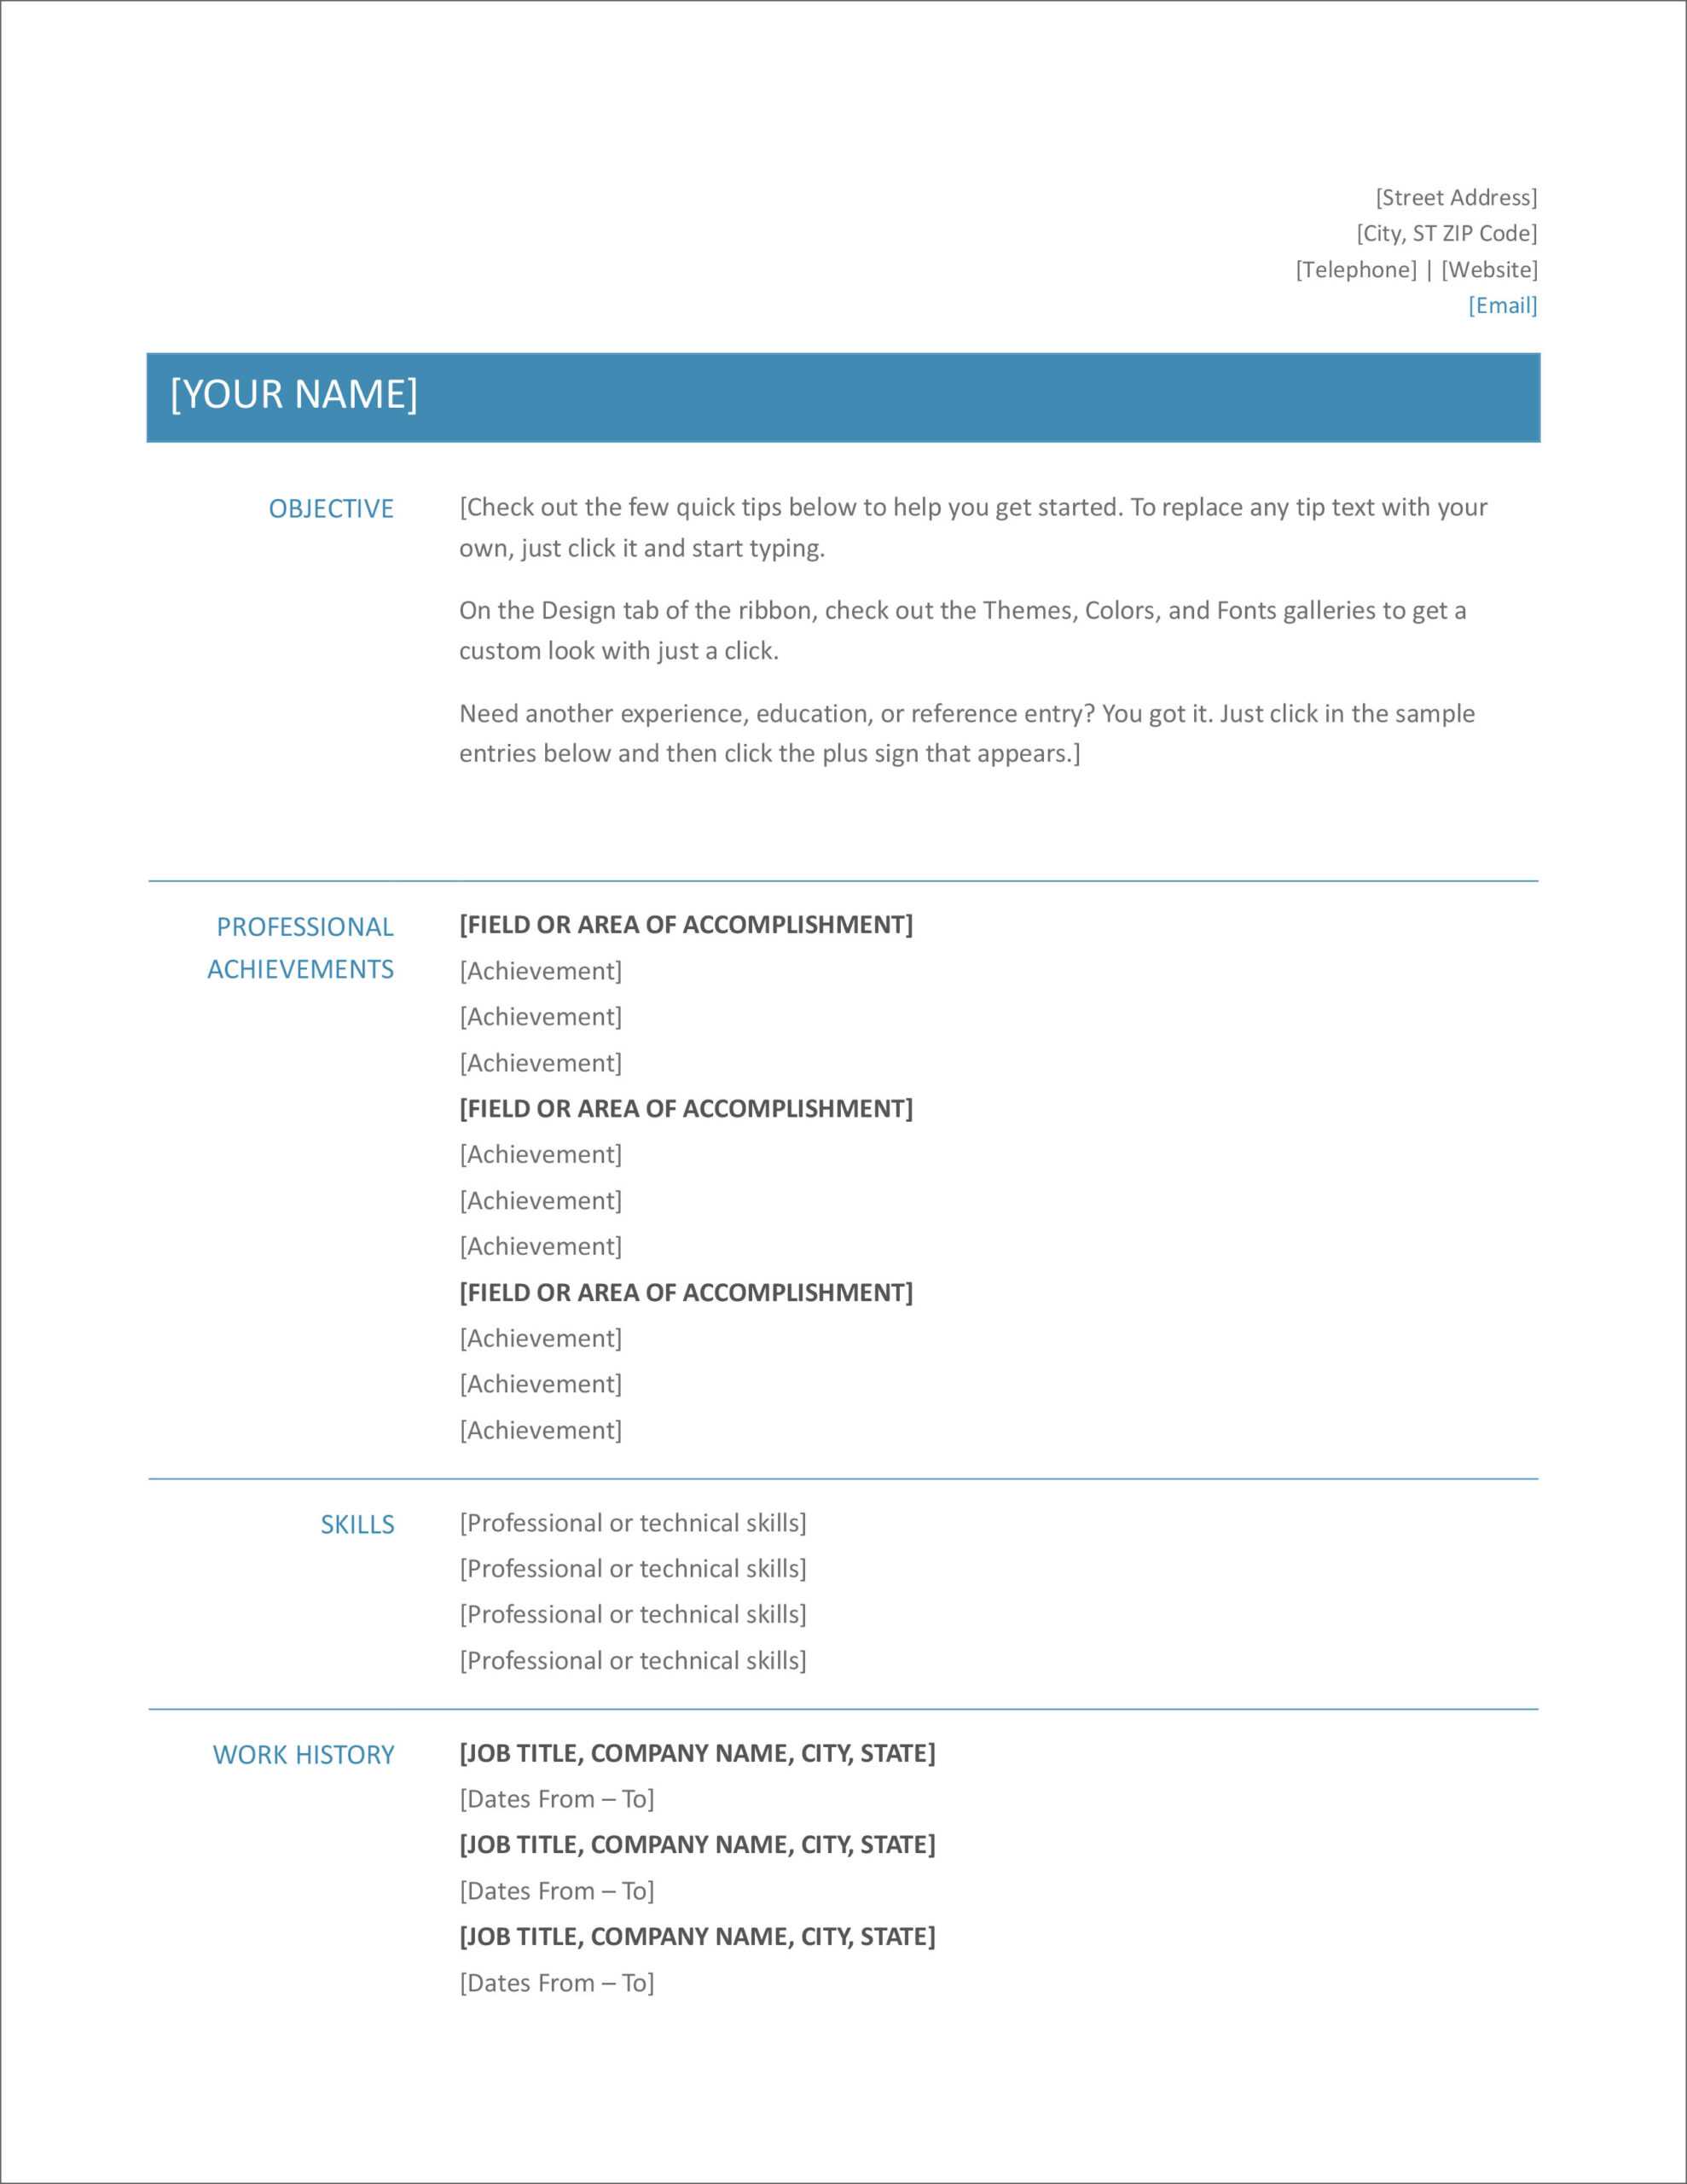 Resume Format Download In Ms Word 2013 – Zohre Within Resume Templates Word 2013